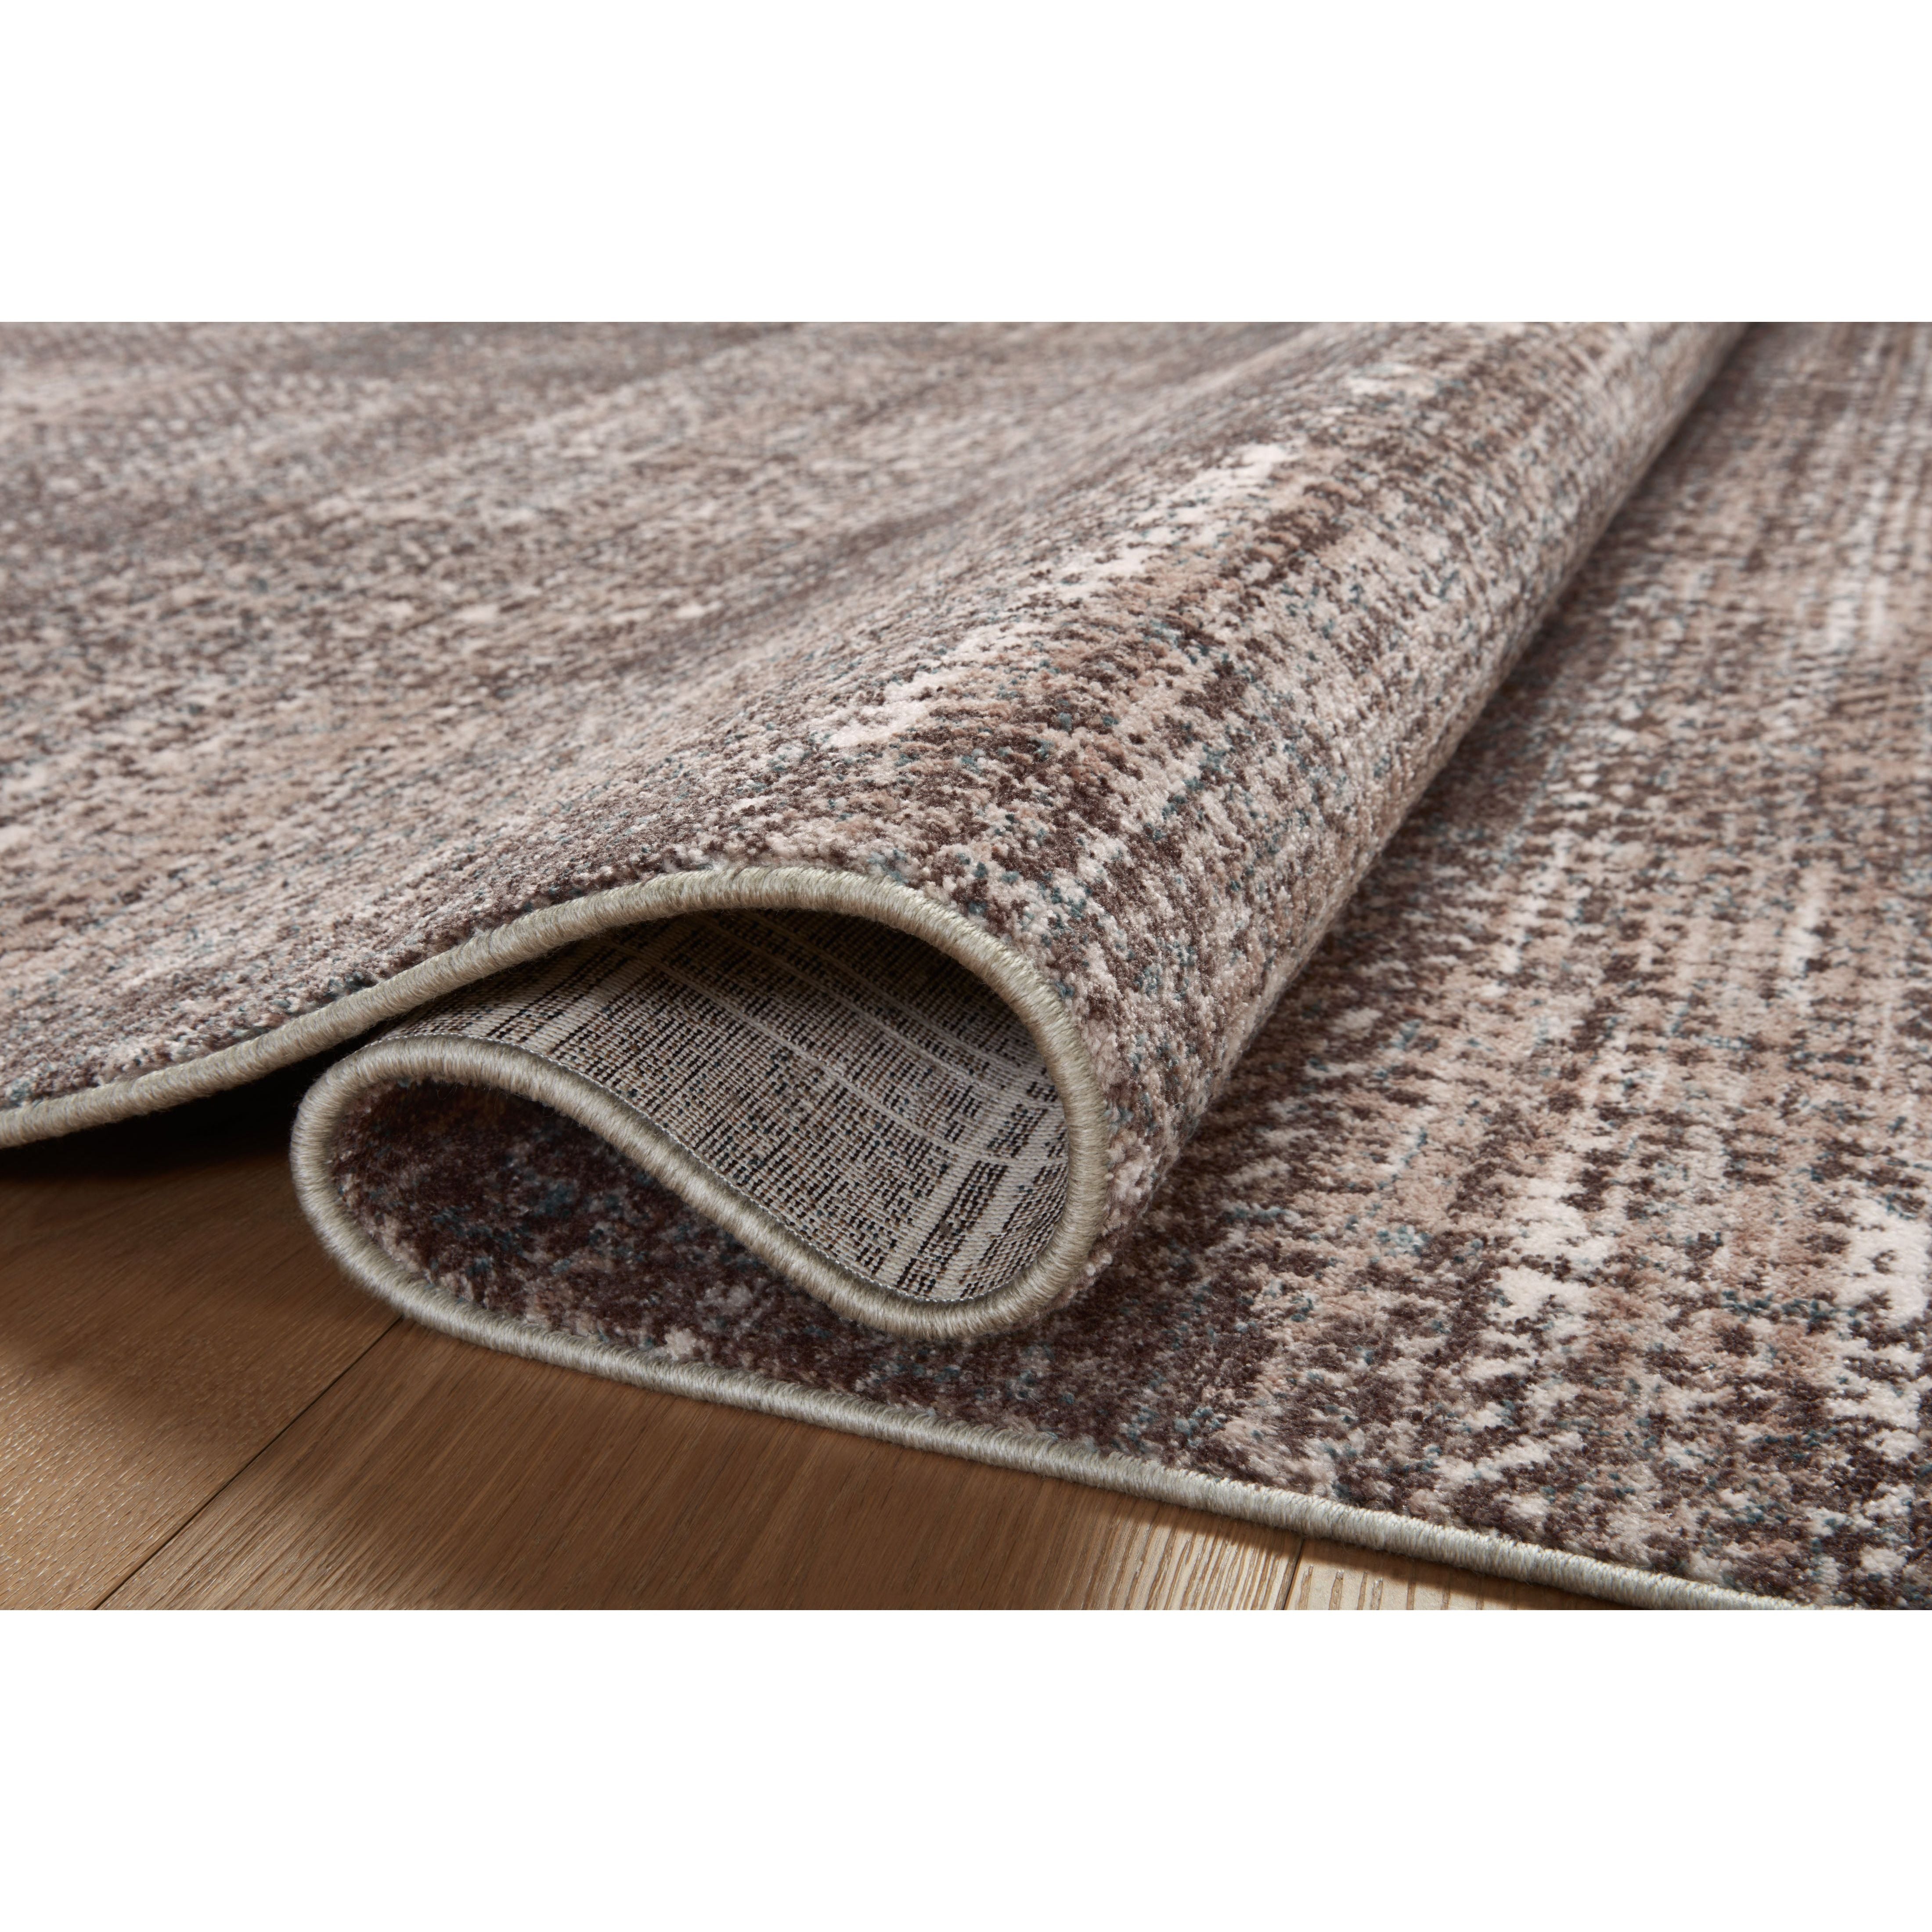 The Ember Collection by Angela Rose x Loloi is a modern flatweave area rug with a timeless plaid pattern that adds depth and coziness to any living room, bedroom, dining room, or hallway. Ember is power-loomed of 100% space-dyed polyester, a durable construction that creates a nuanced depth of color, available in a range of neutral palettes. Amethyst Home provides interior design, new home construction design consulting, vintage area rugs, and lighting in the Los Angeles metro area.